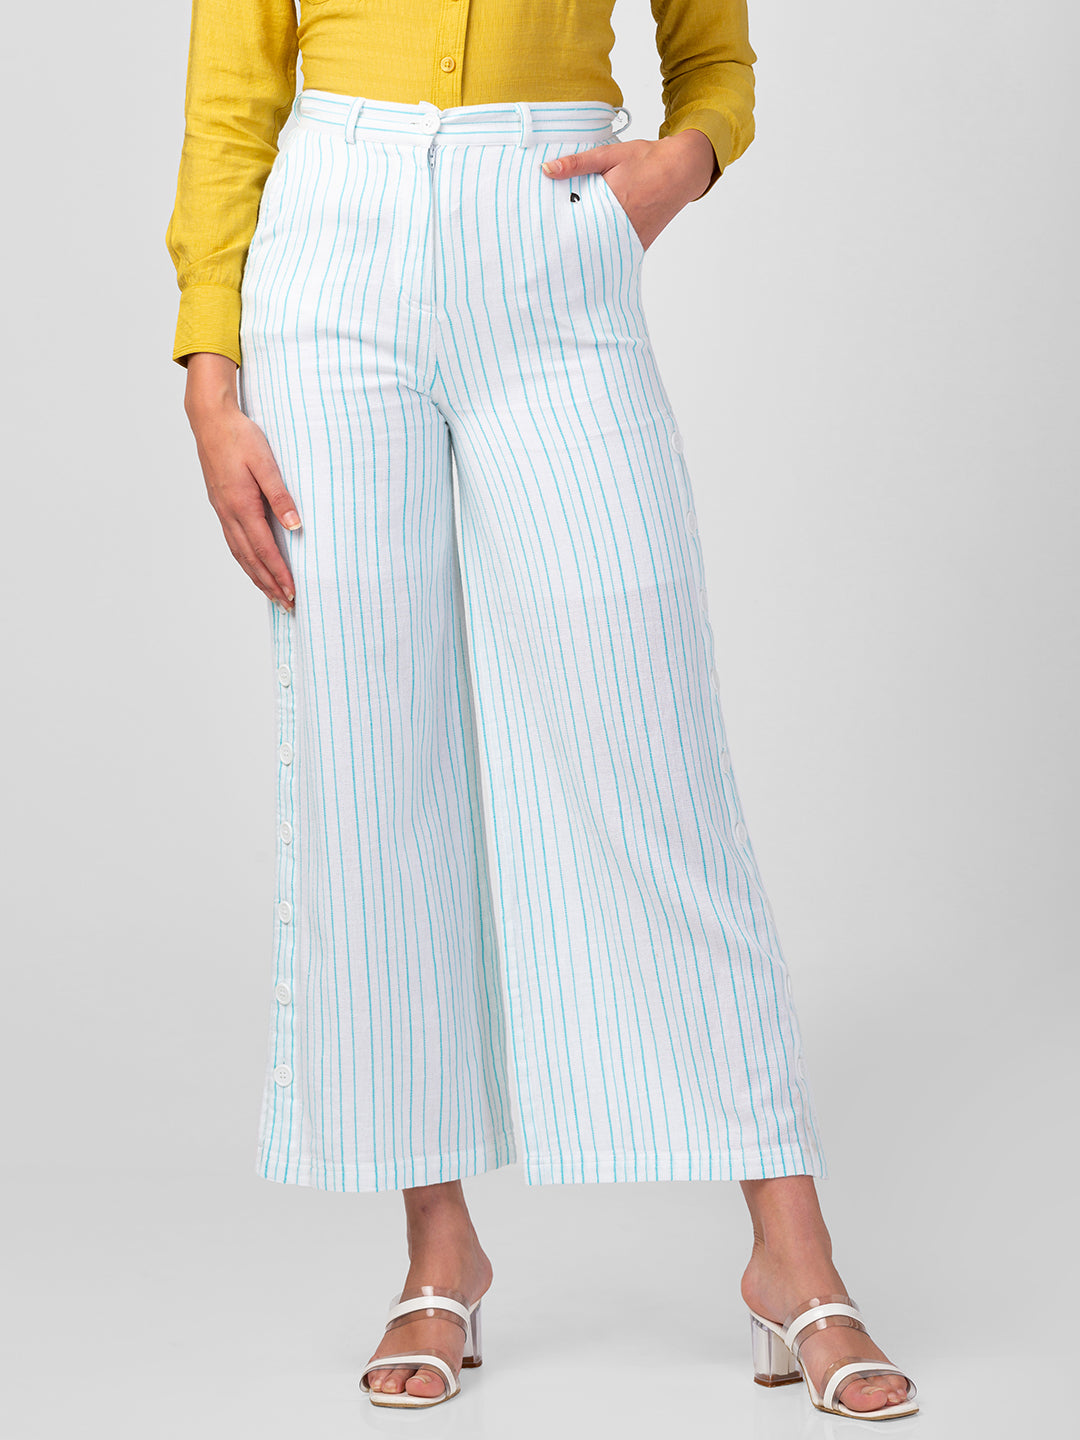 Spykar White Cotton blend Bootcut Fit Ankle Length Striped Trousers